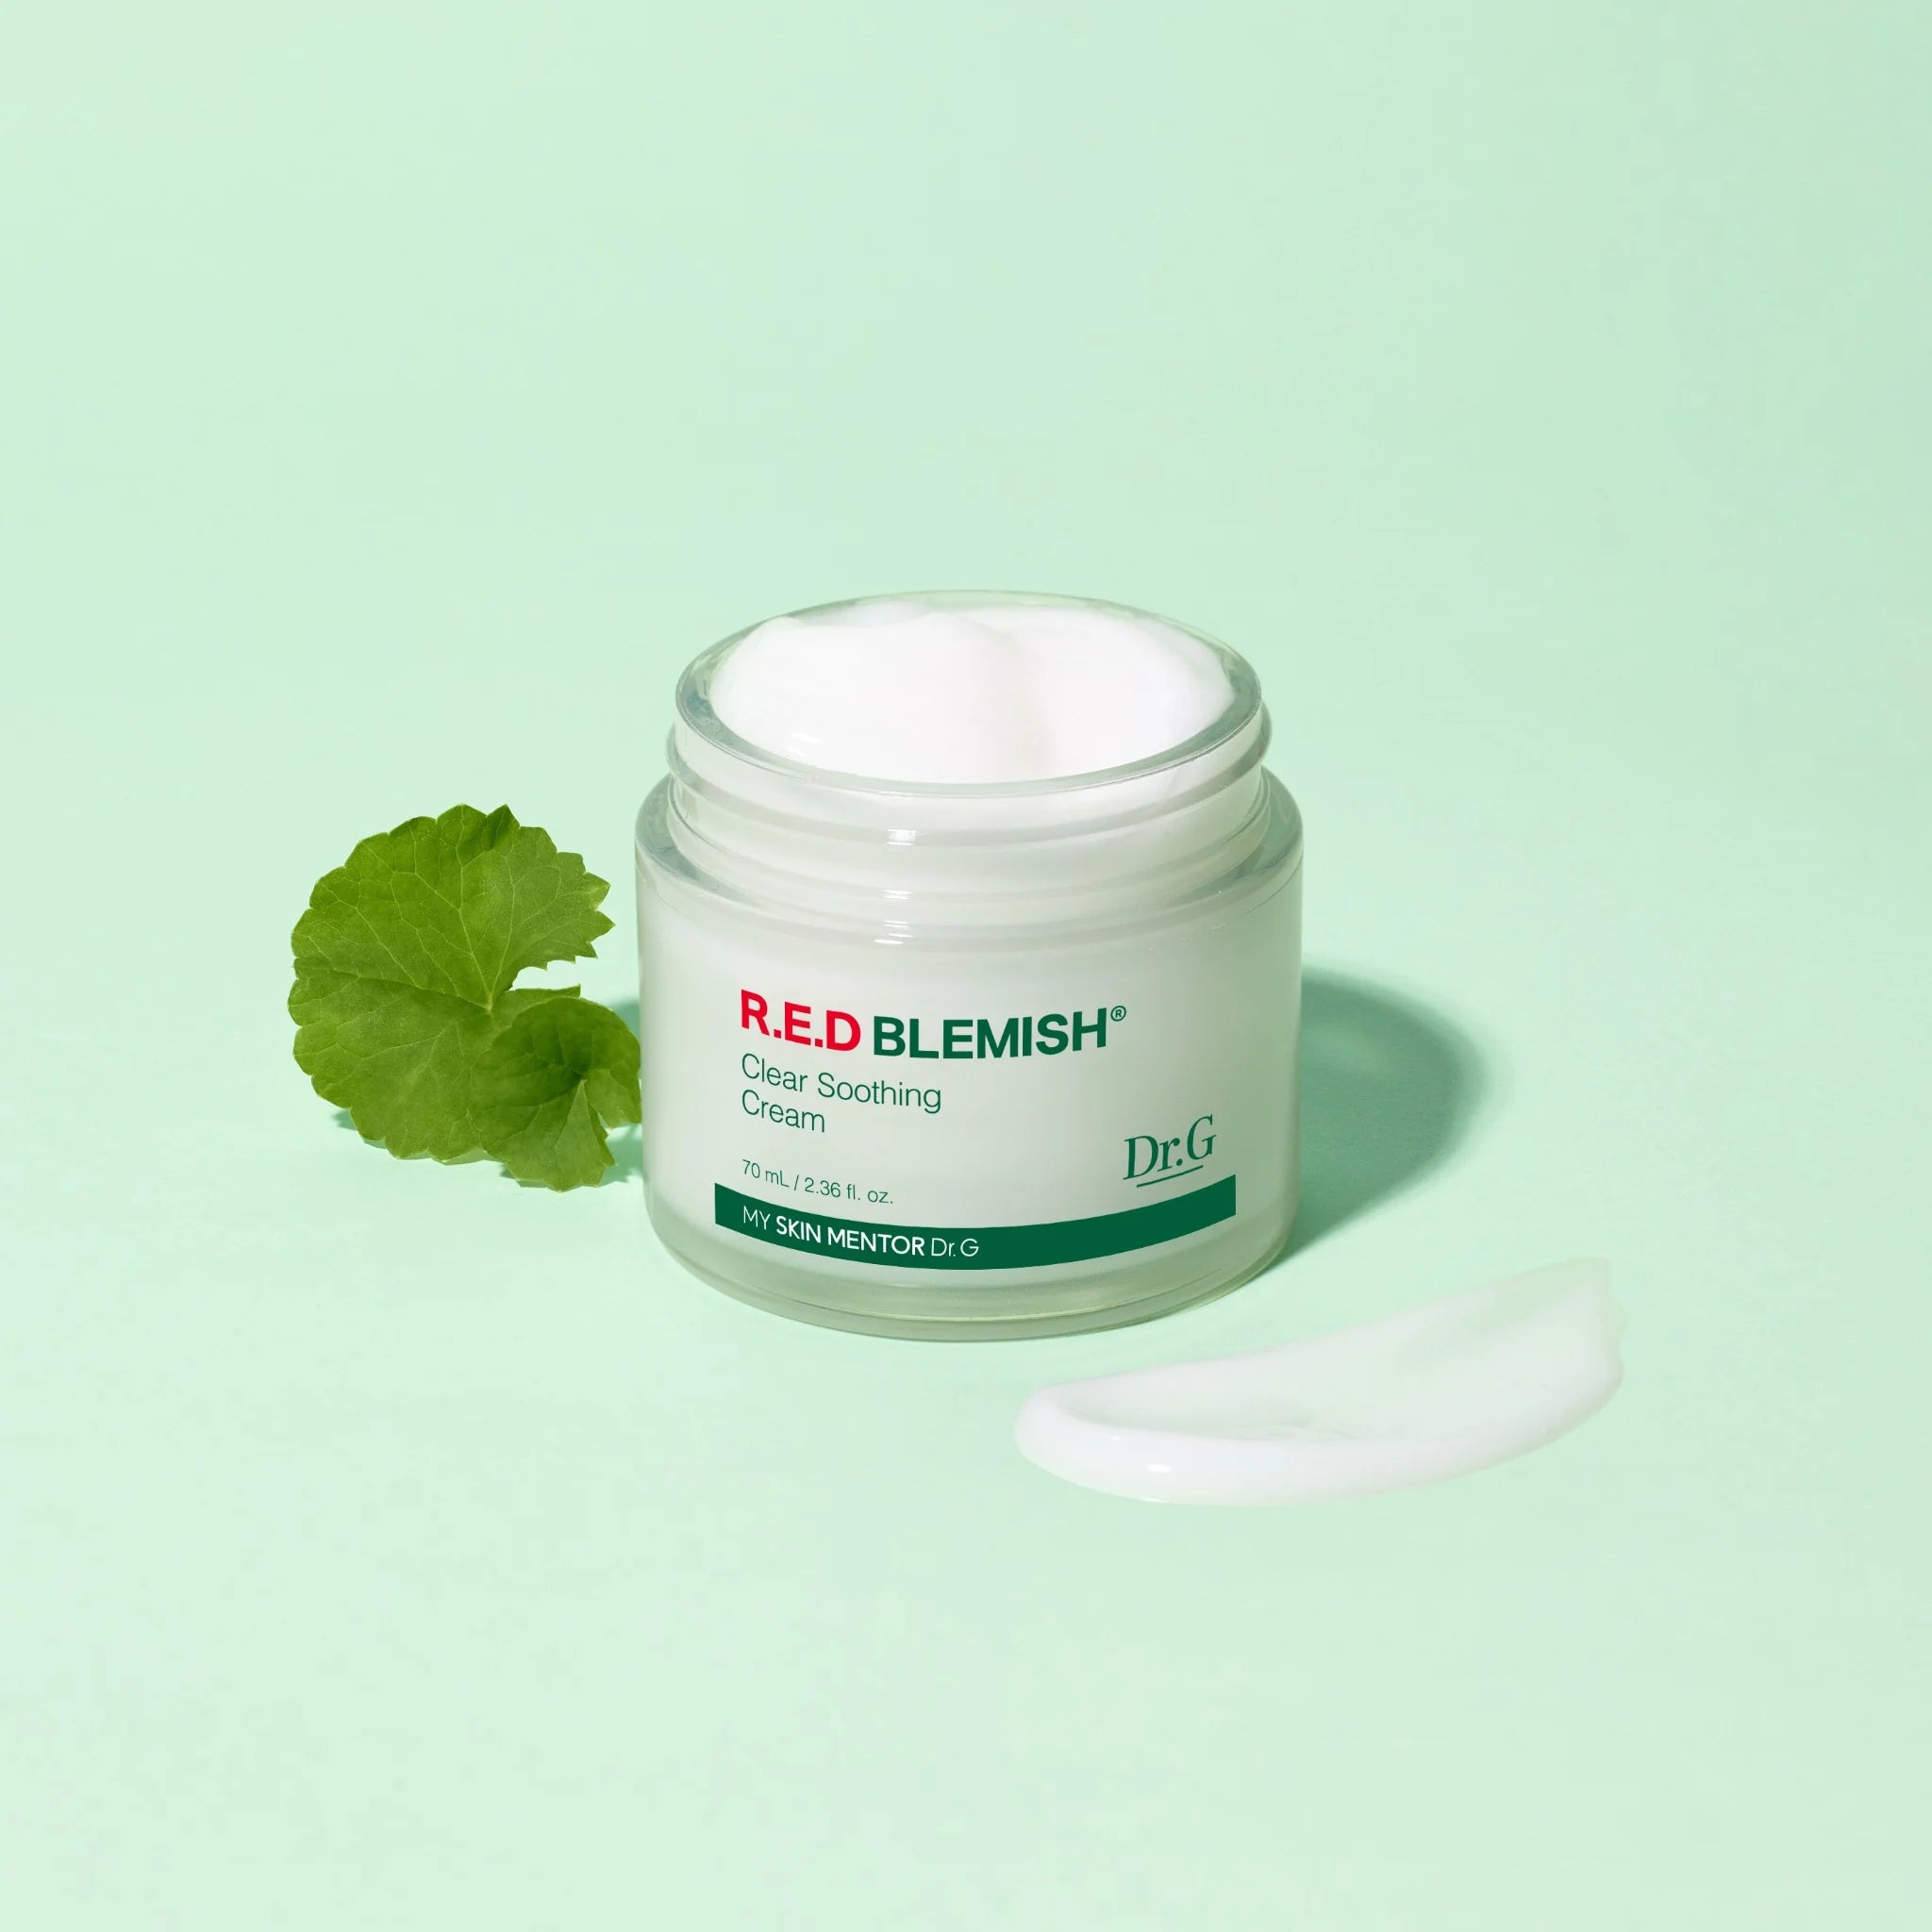 R.E.D. Blemish Clear Soothing Cream